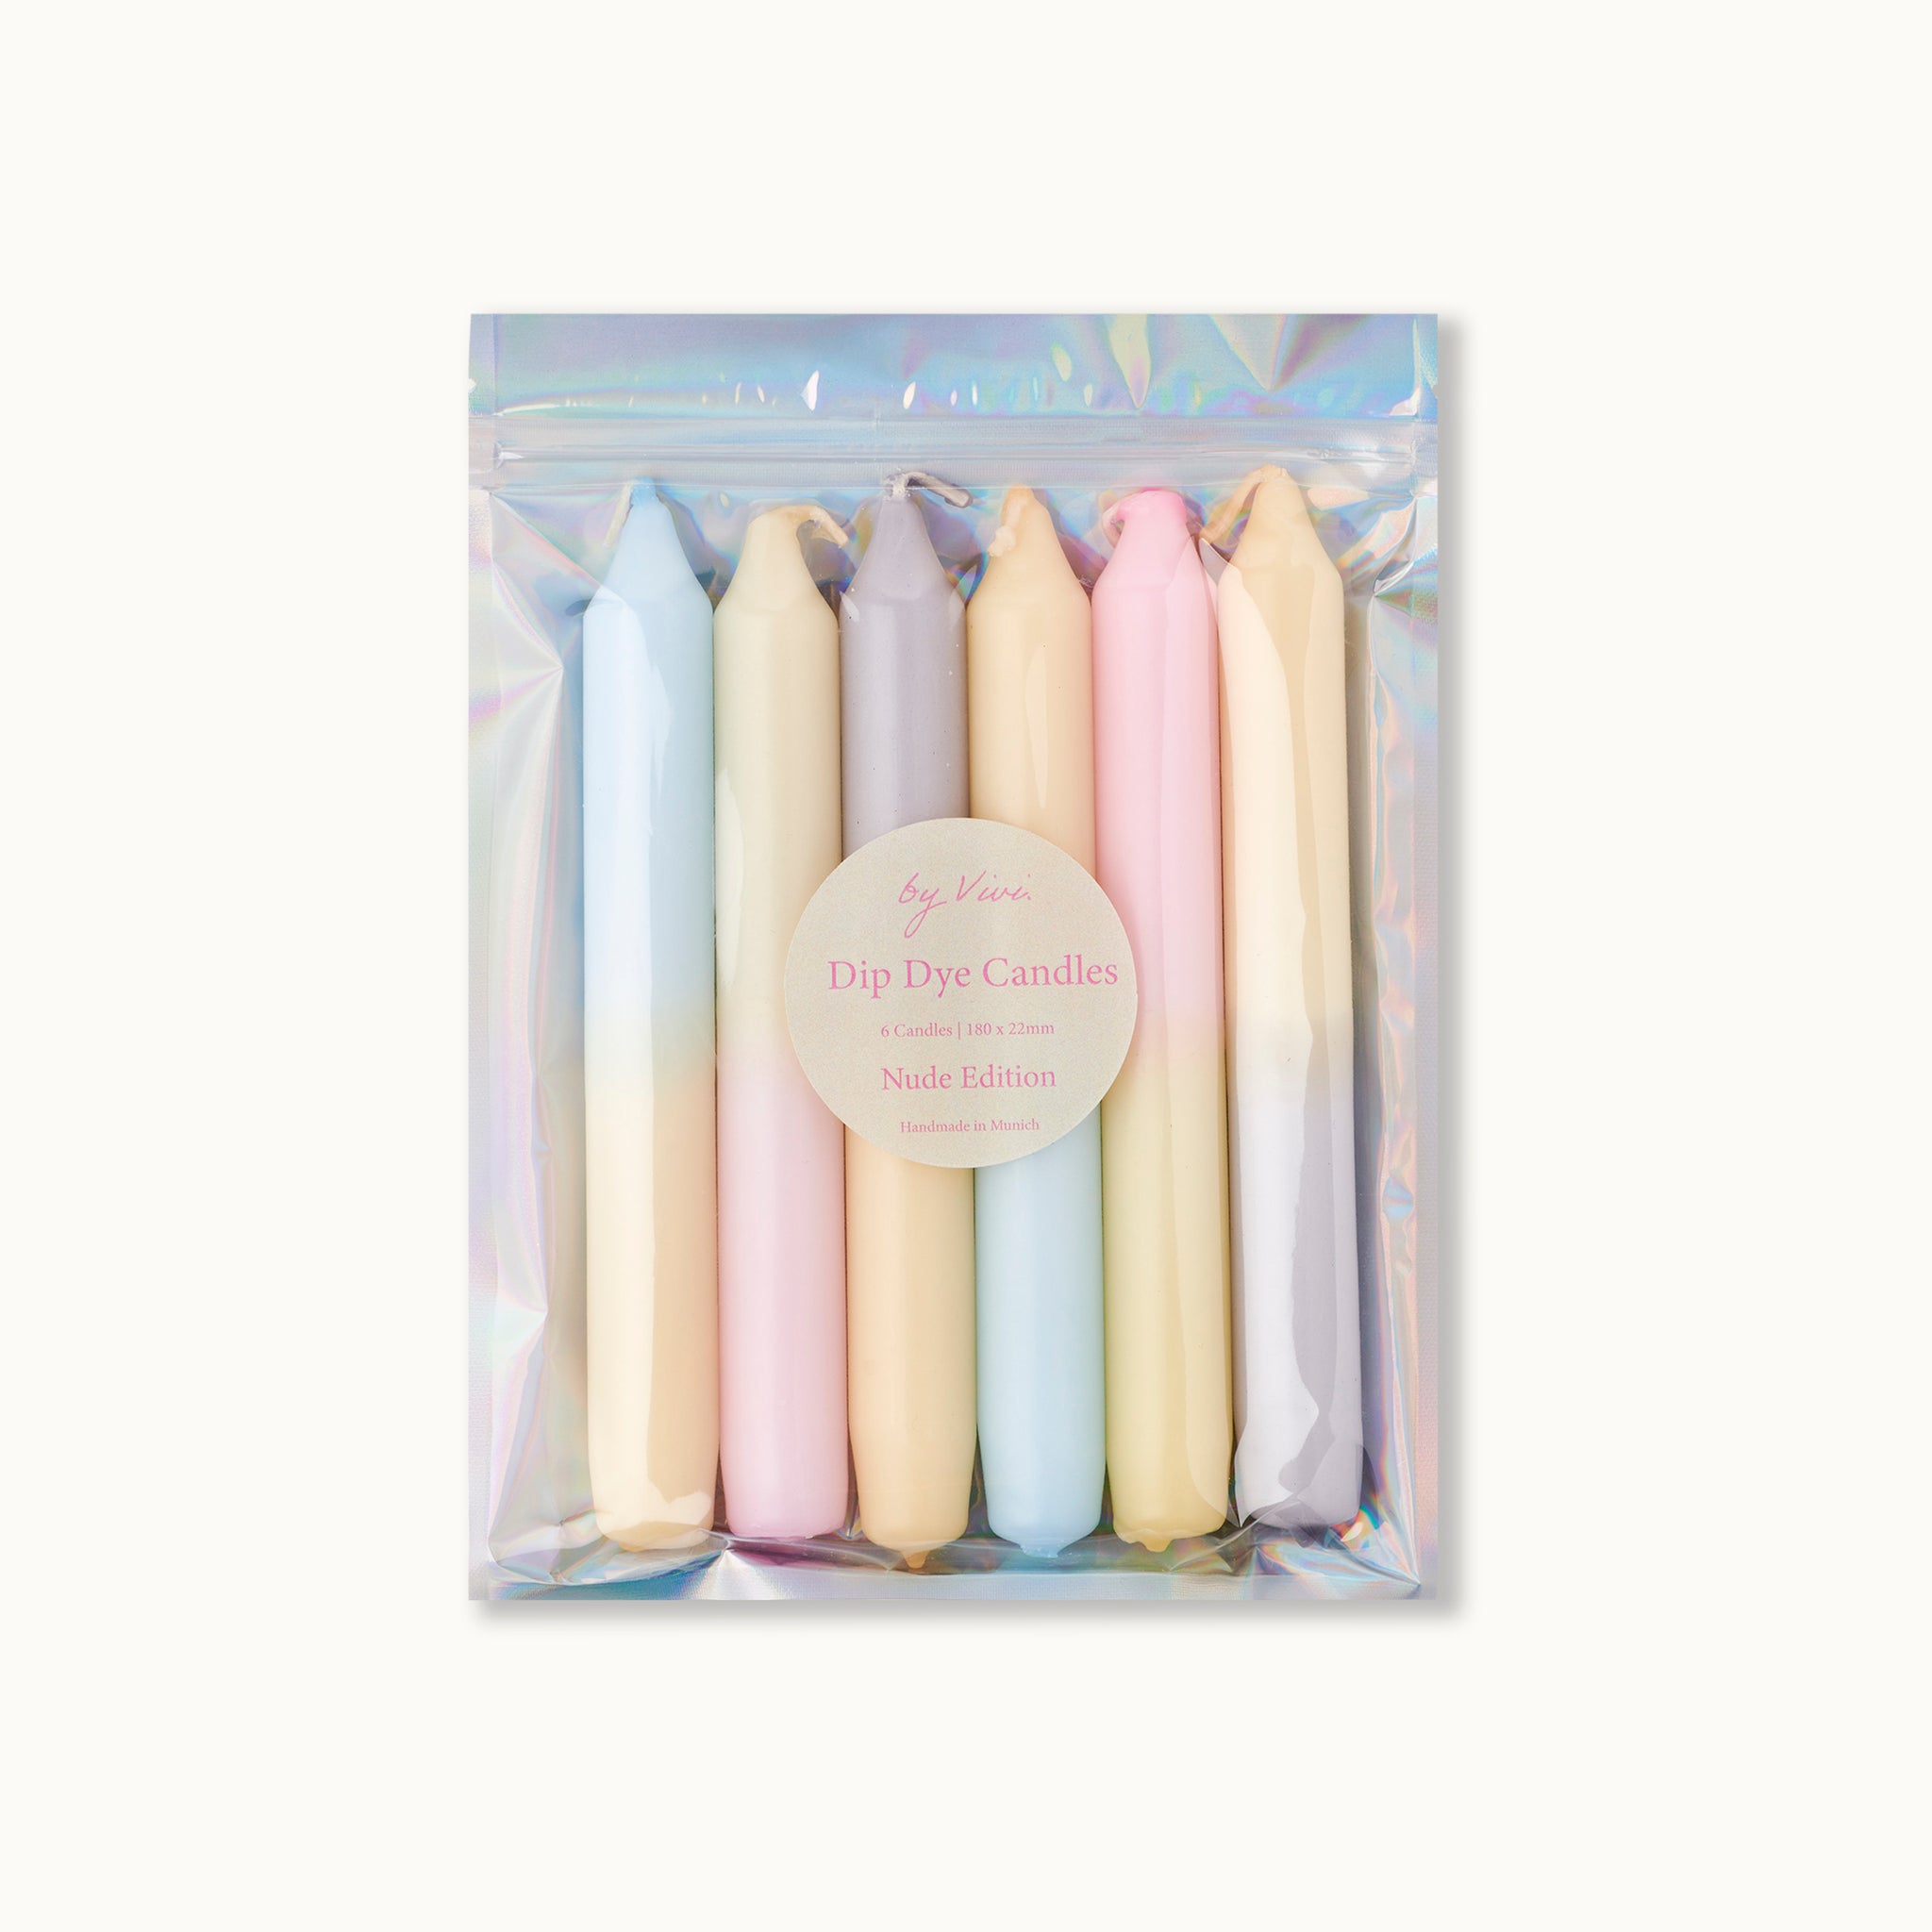 Dip Dye Candle Set: The Nudes